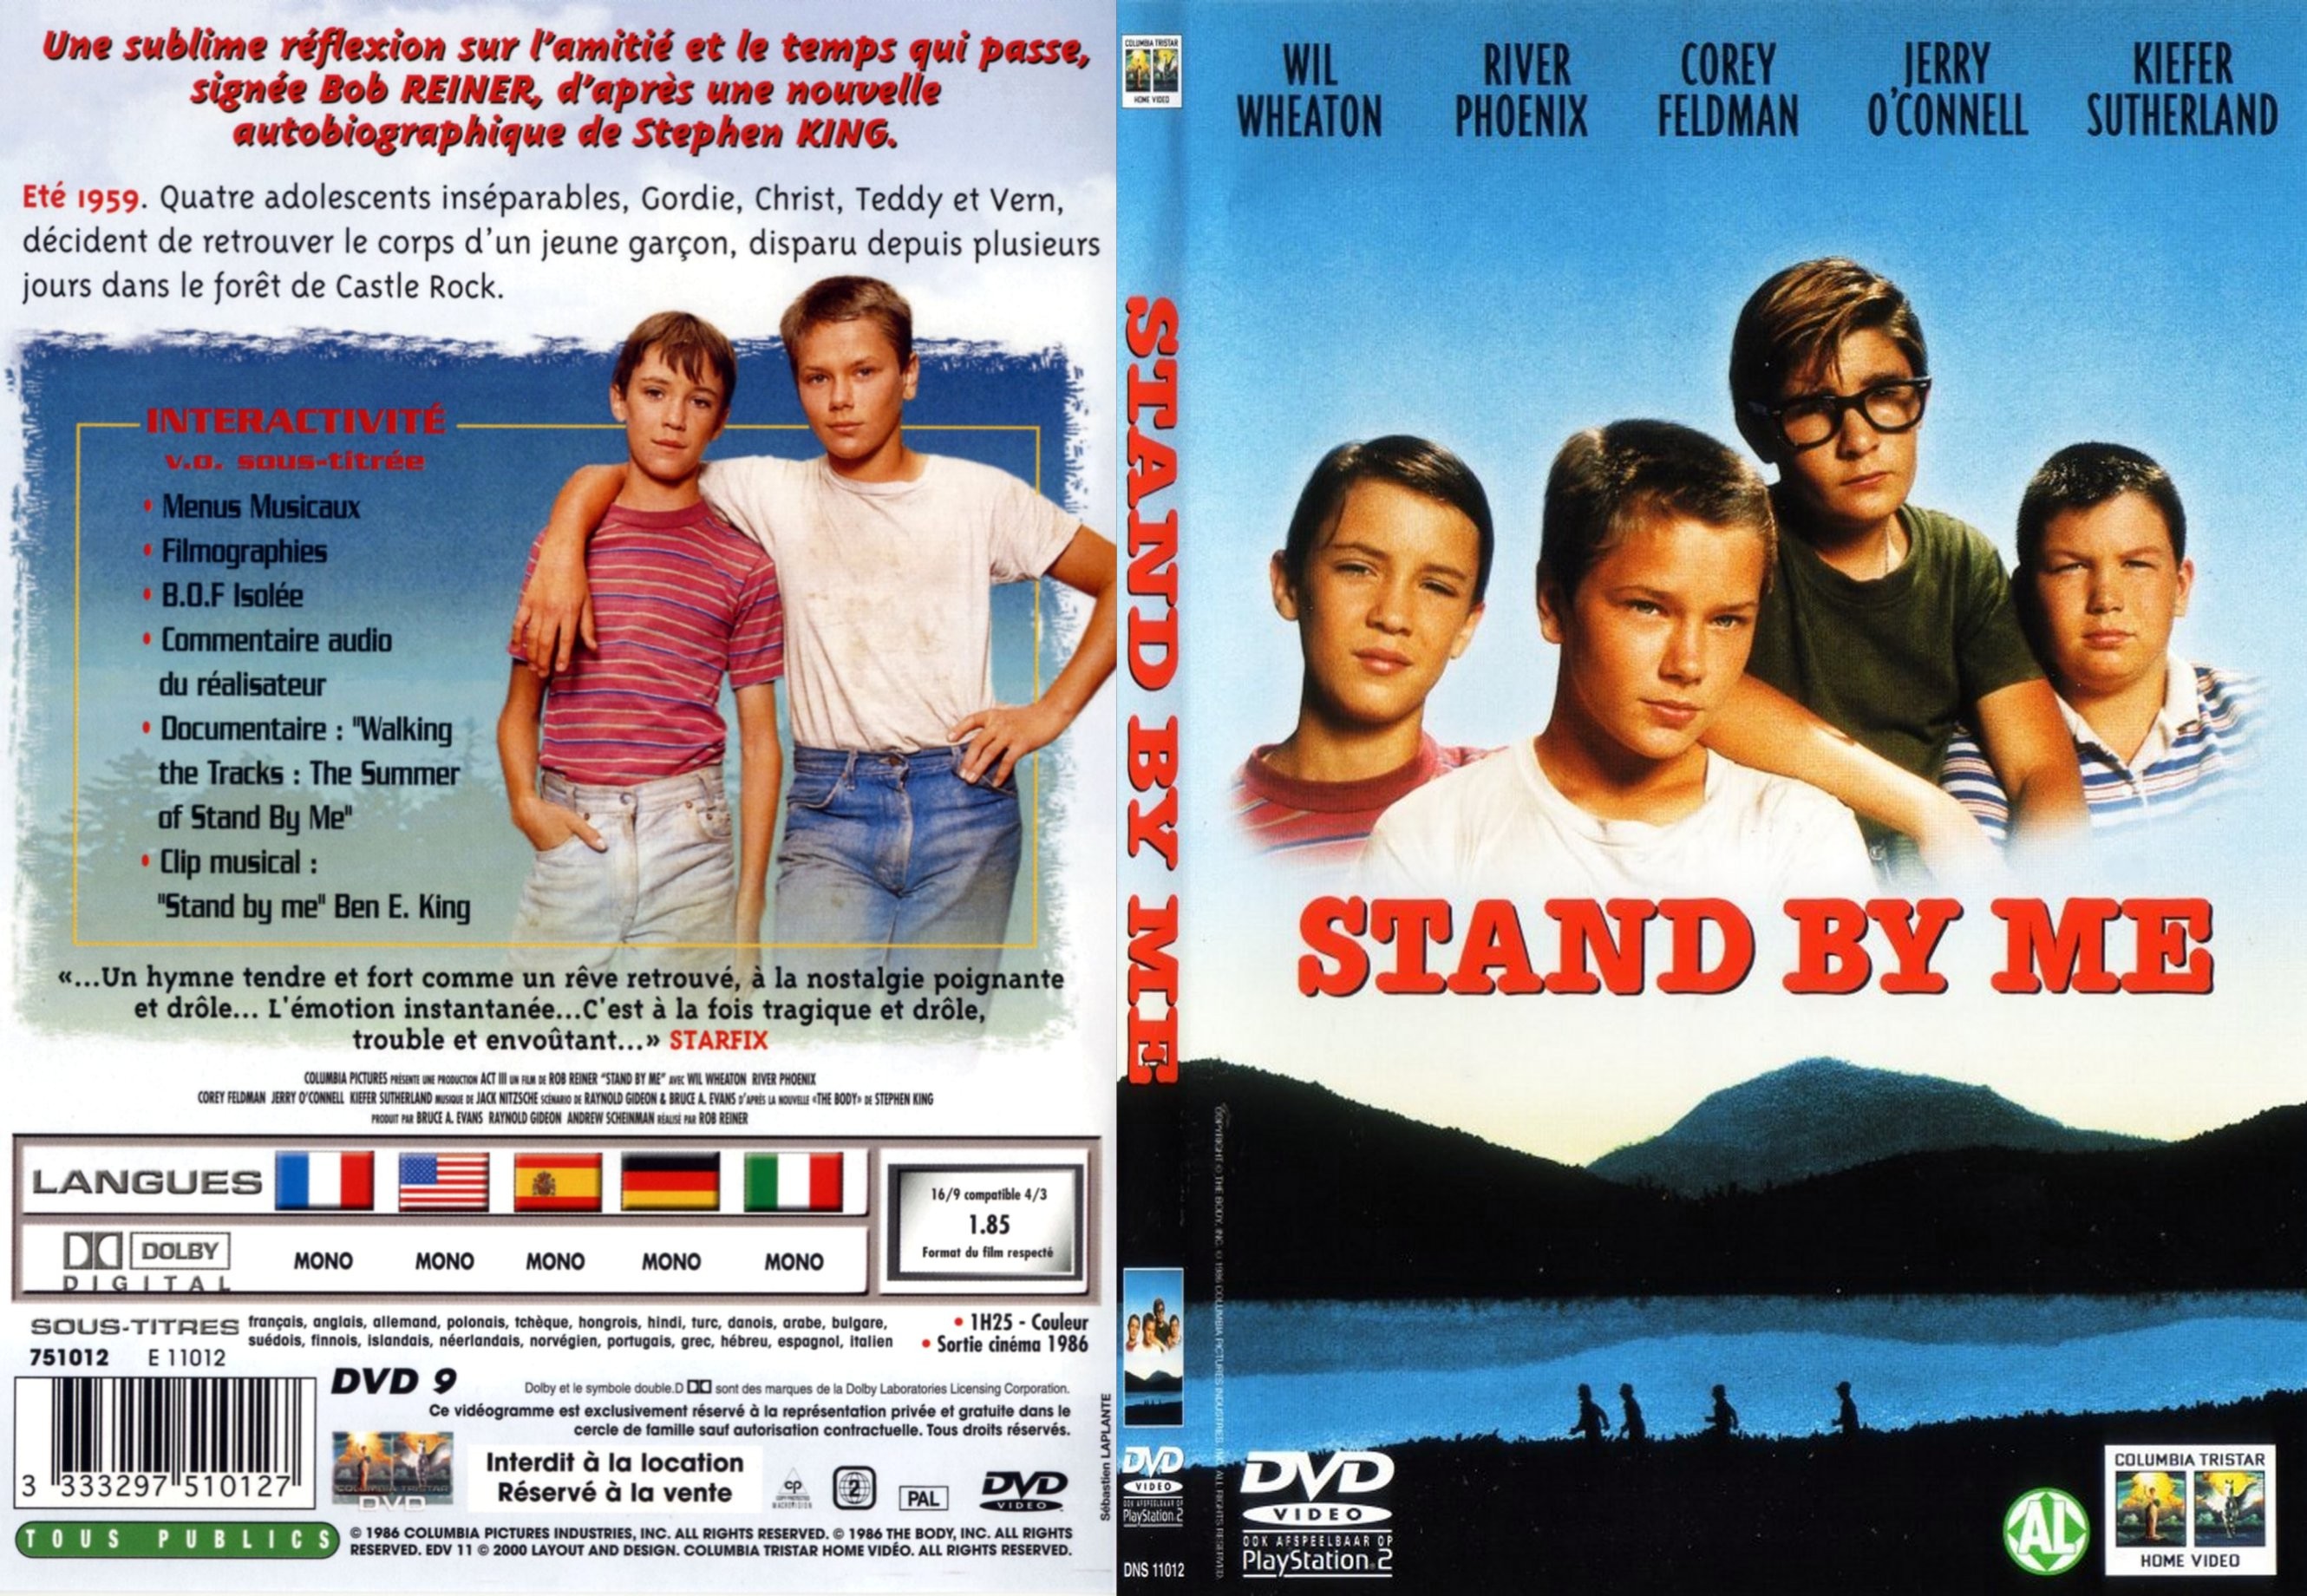 Jaquette DVD Stand by me - SLIM